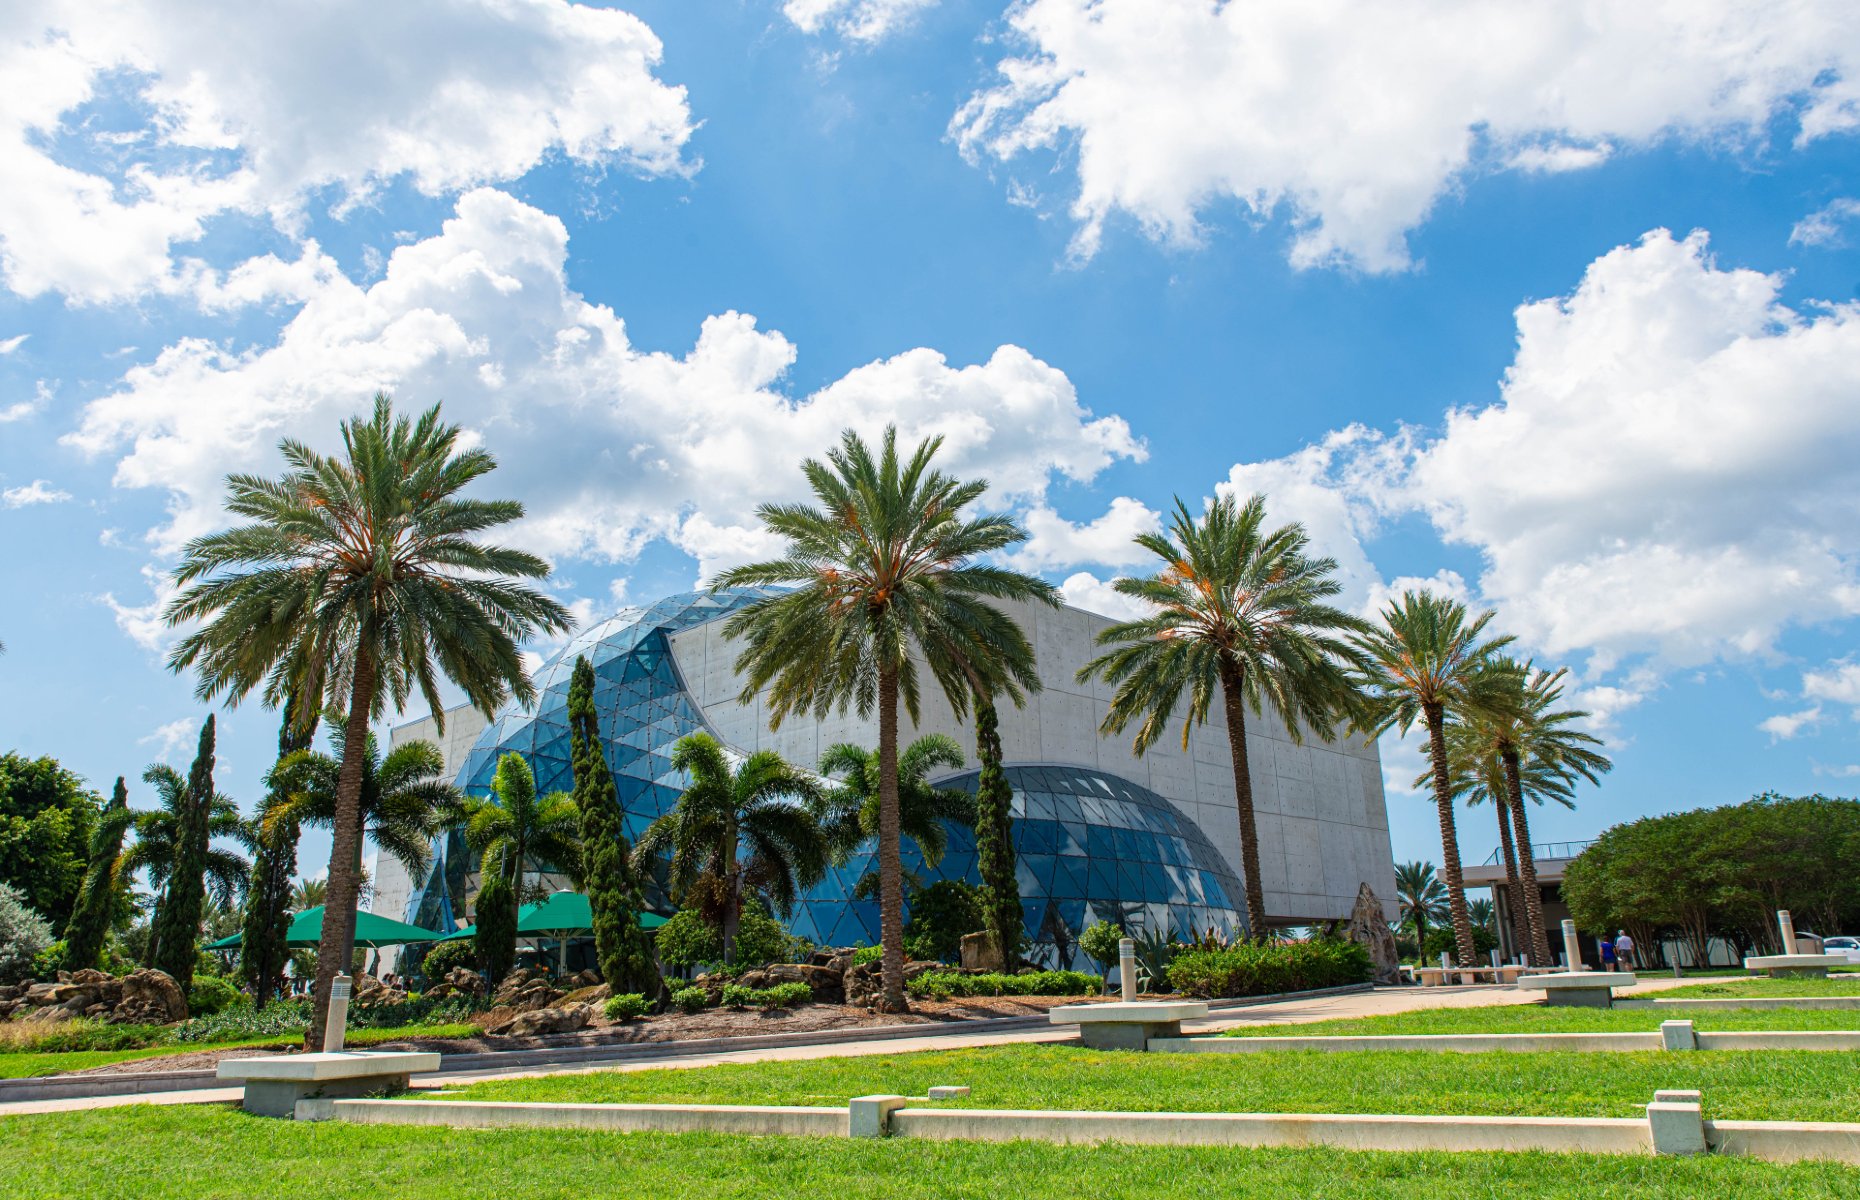 The Dali Museum in St Pete (Image: Courtesy of VisitStPeteClearwater.com)